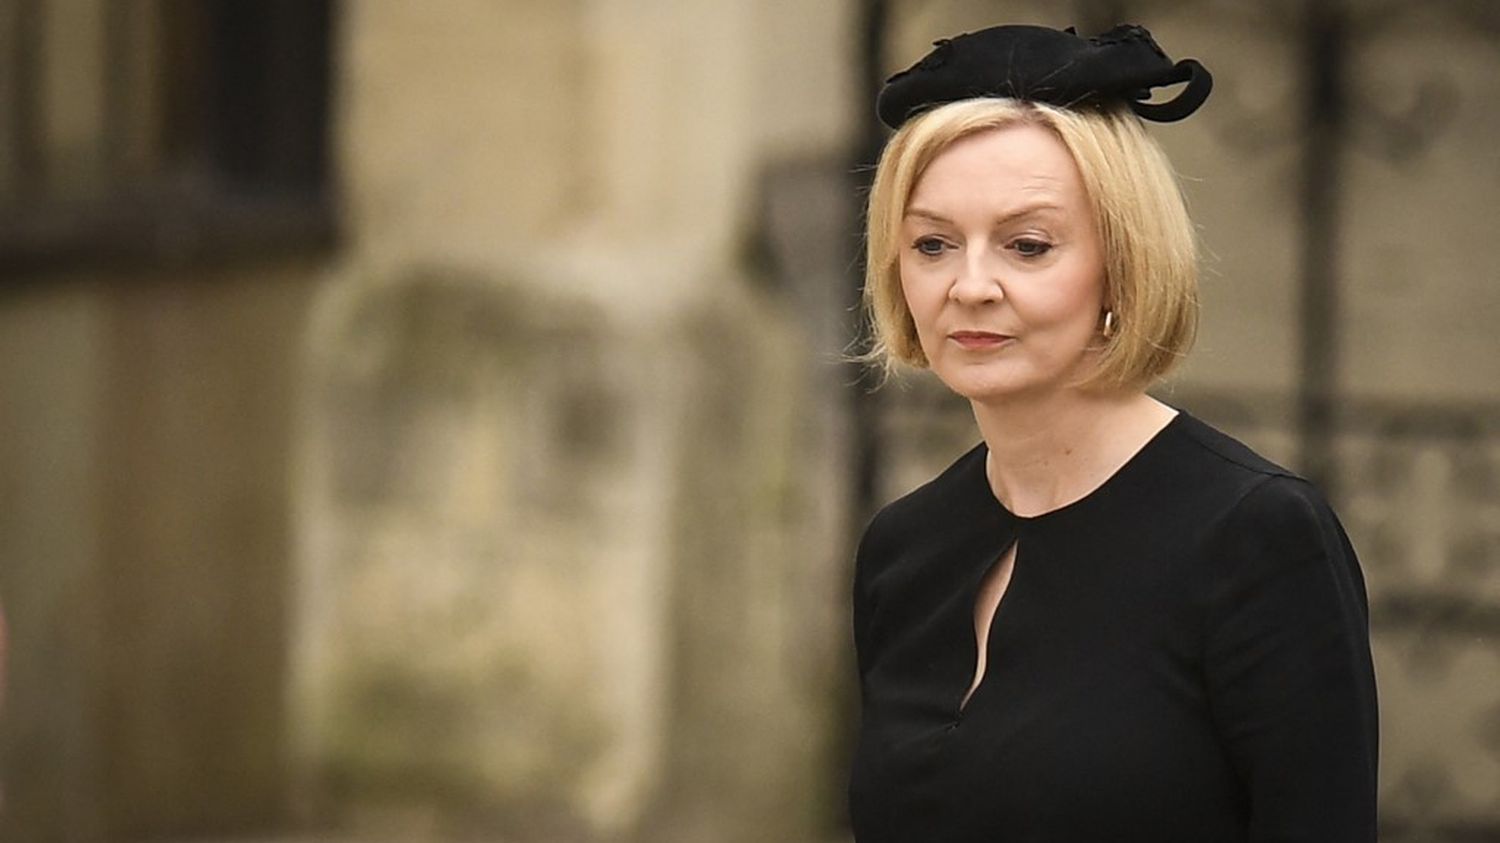 United Kingdom: after the funeral of Elizabeth II, Prime Minister Liz Truss expected at the turn
